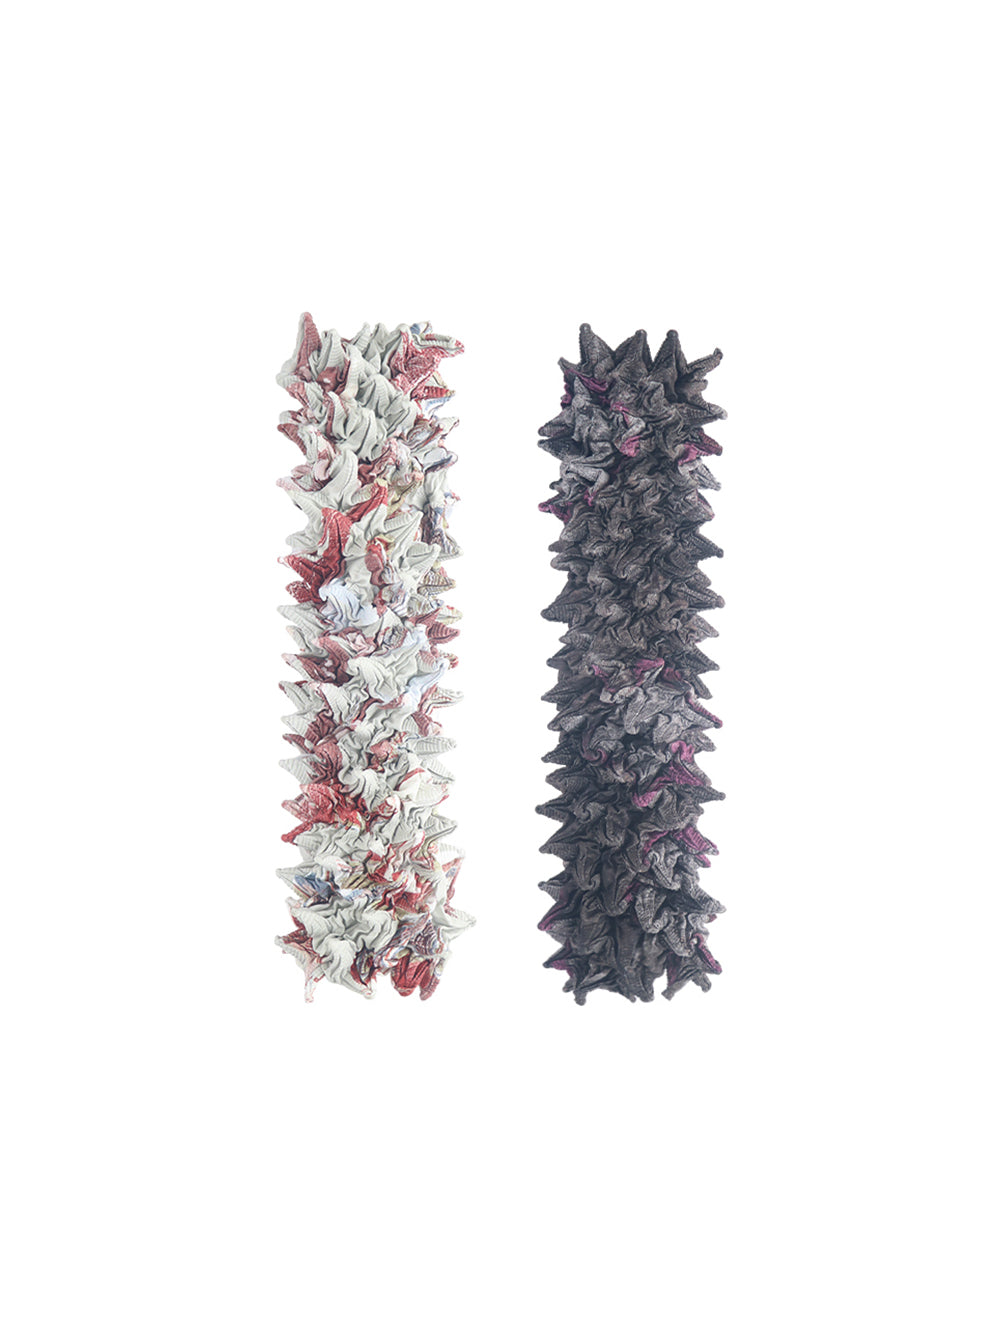 MUKTANK x COOLOTHES Pleated Paper-cut Totem Multi-wear Stacked Leg Warmers and Sleeves